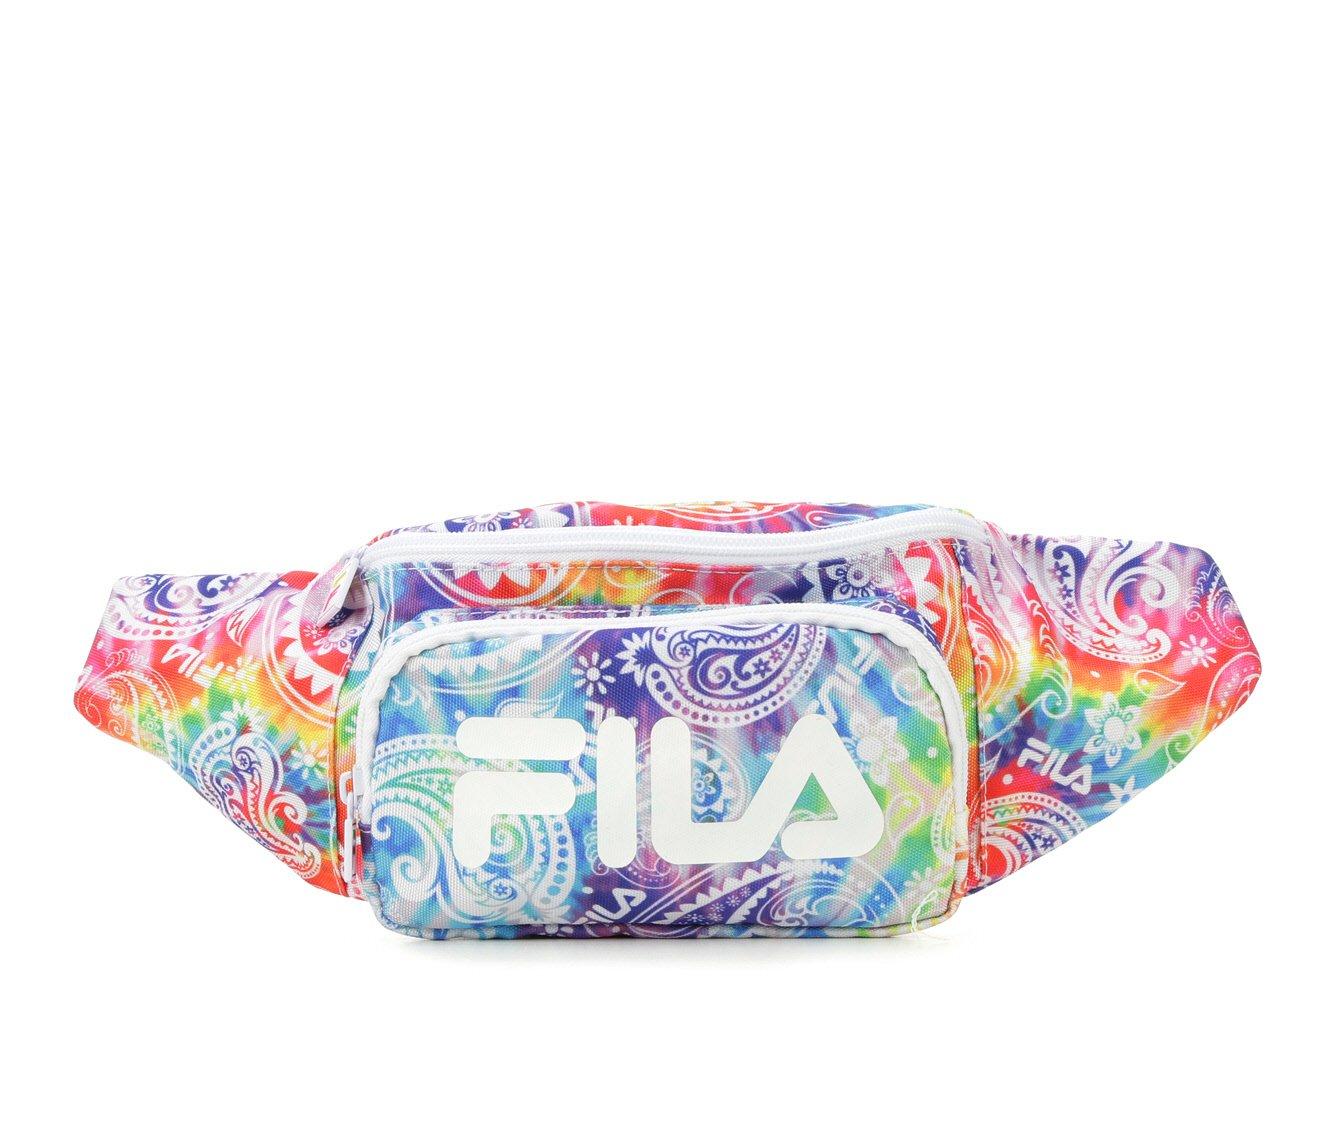 bout Oven Isolator Fila Fanny Pack / Waist Pack | Shoe Carnival